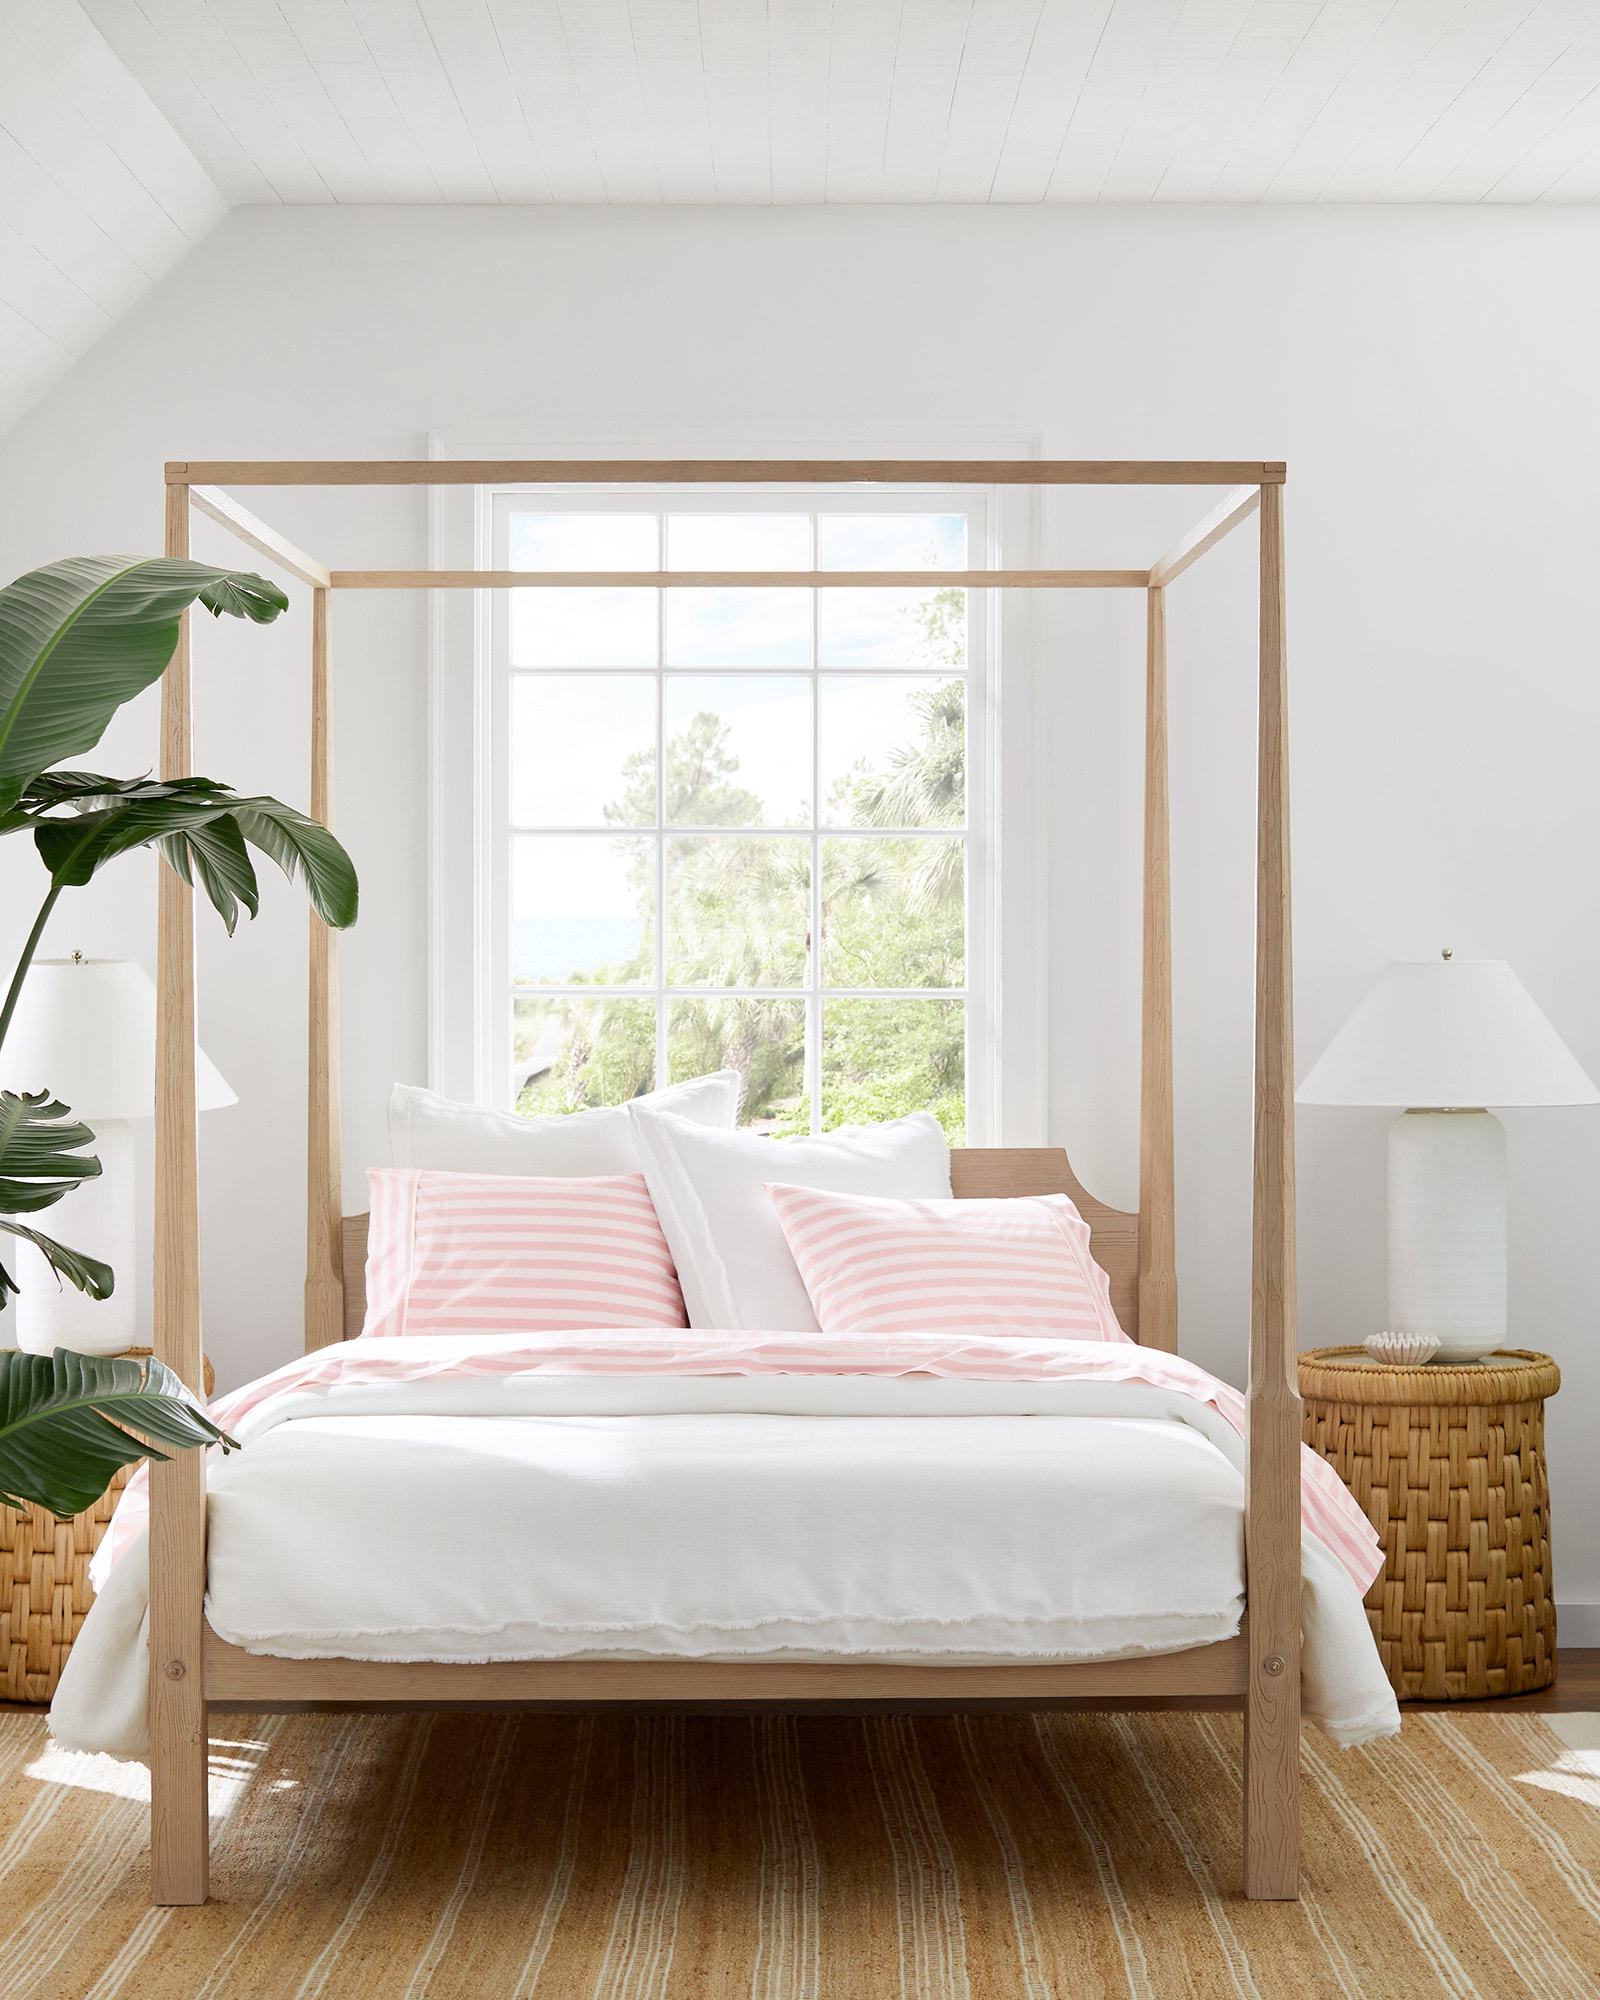 Serena & Lily - bedroom - inspiring - canopy bed